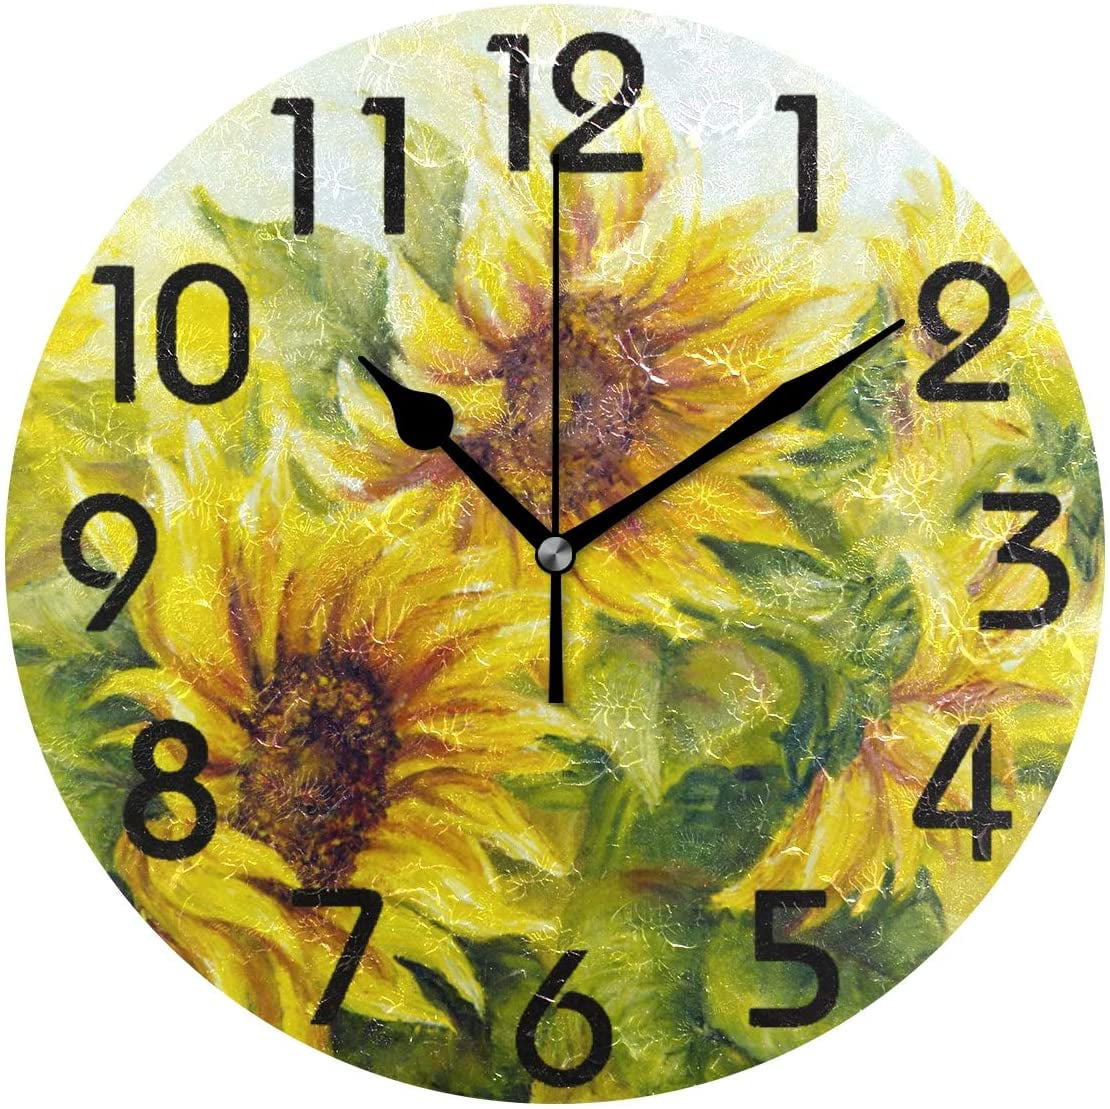 Vintage Round Wooden Wall Clock Rustic Sunflower Home Office Wall Clock 